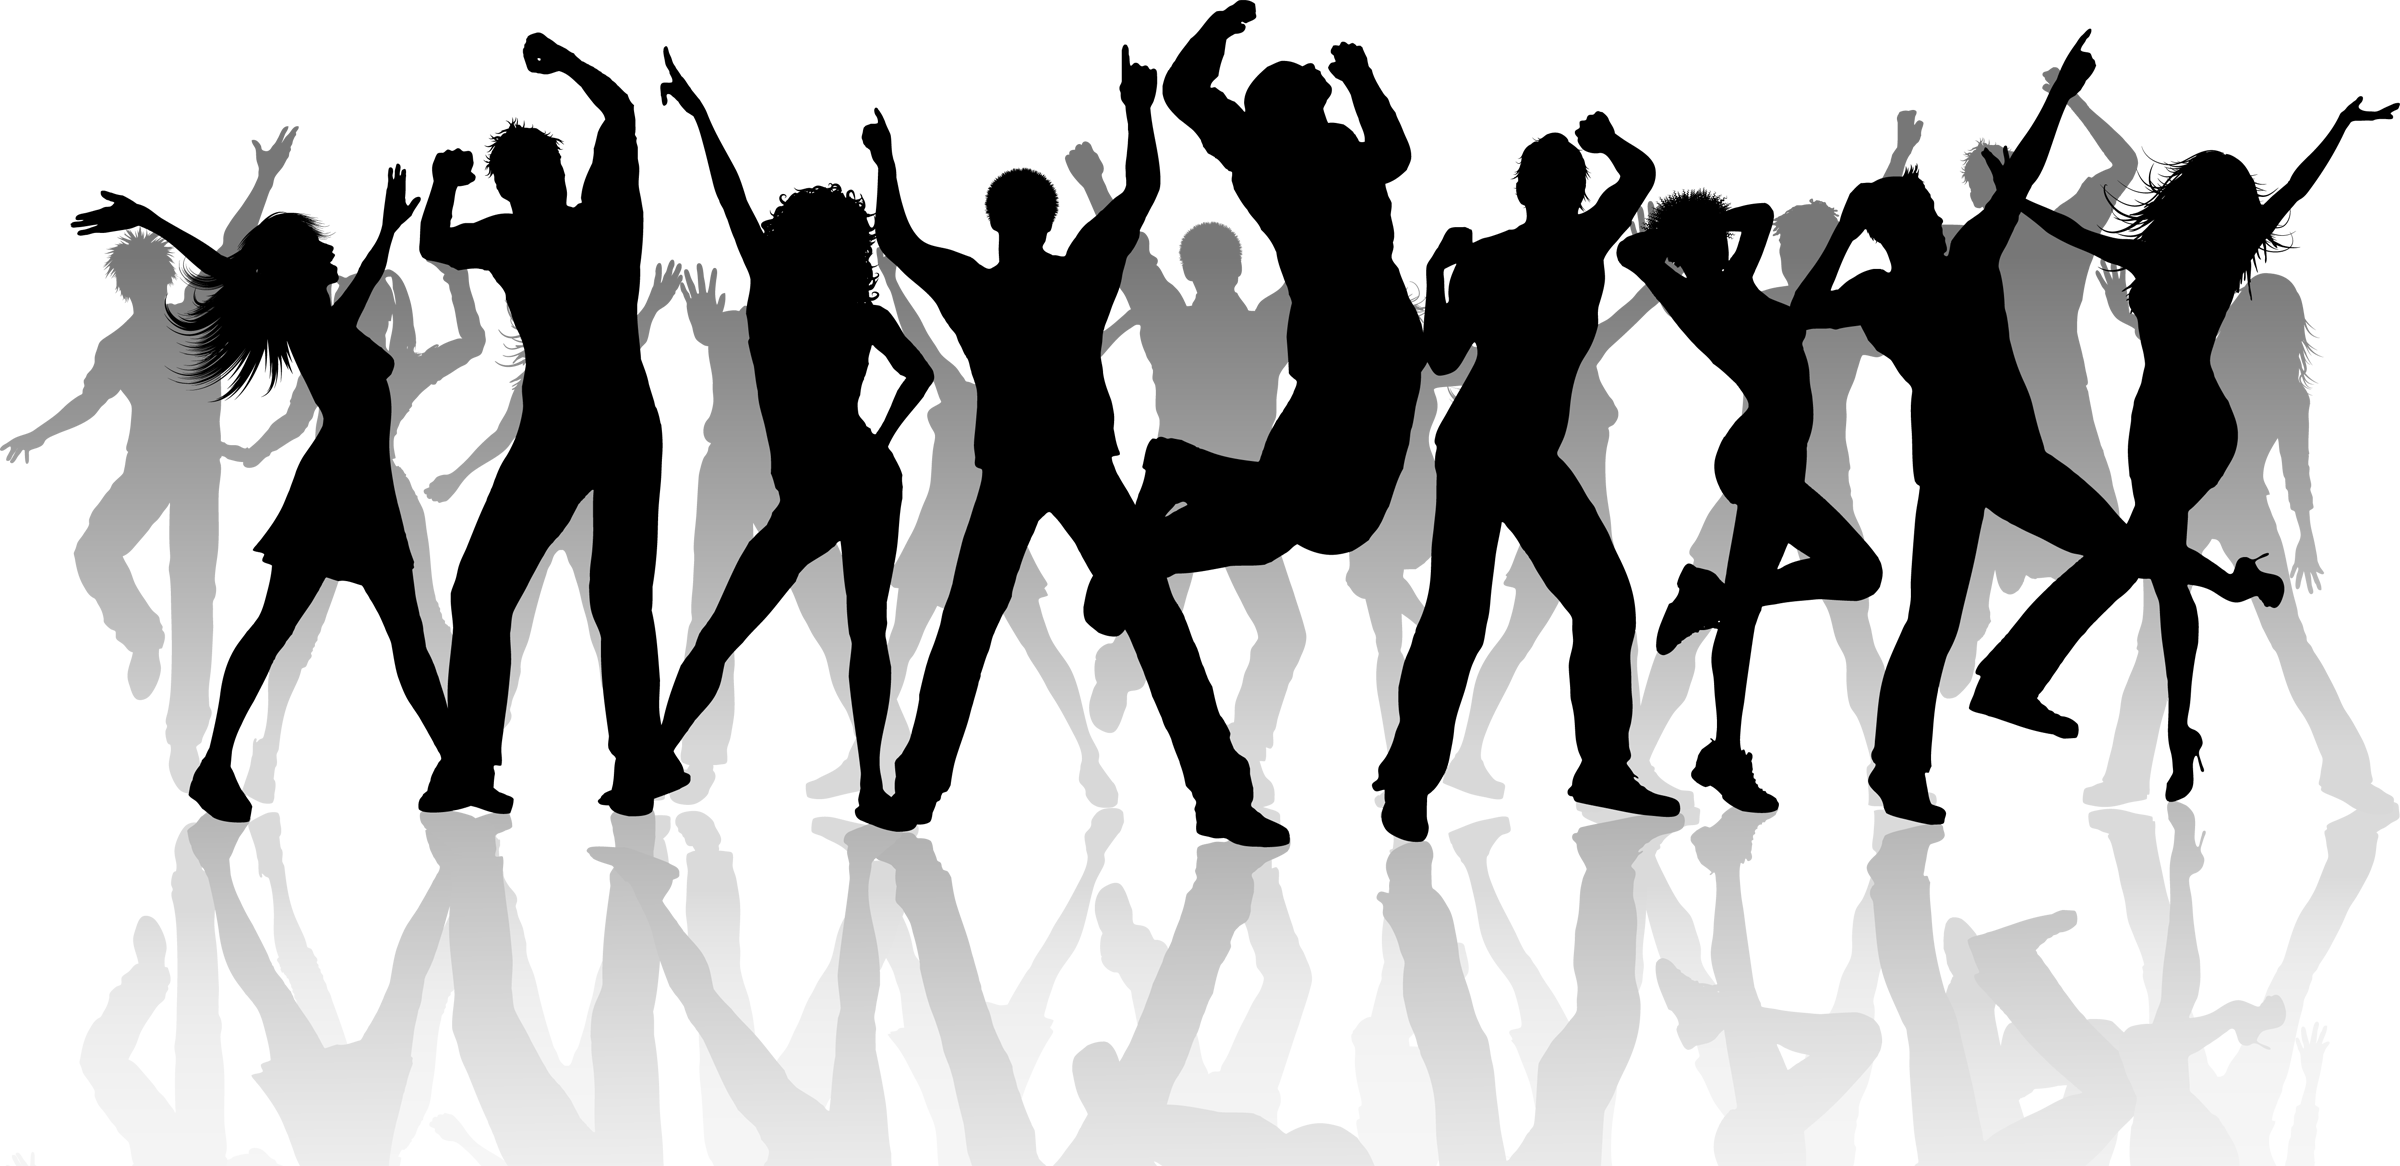 Dance Silhouette People Group Dancing HD Image Free PNG Clipart